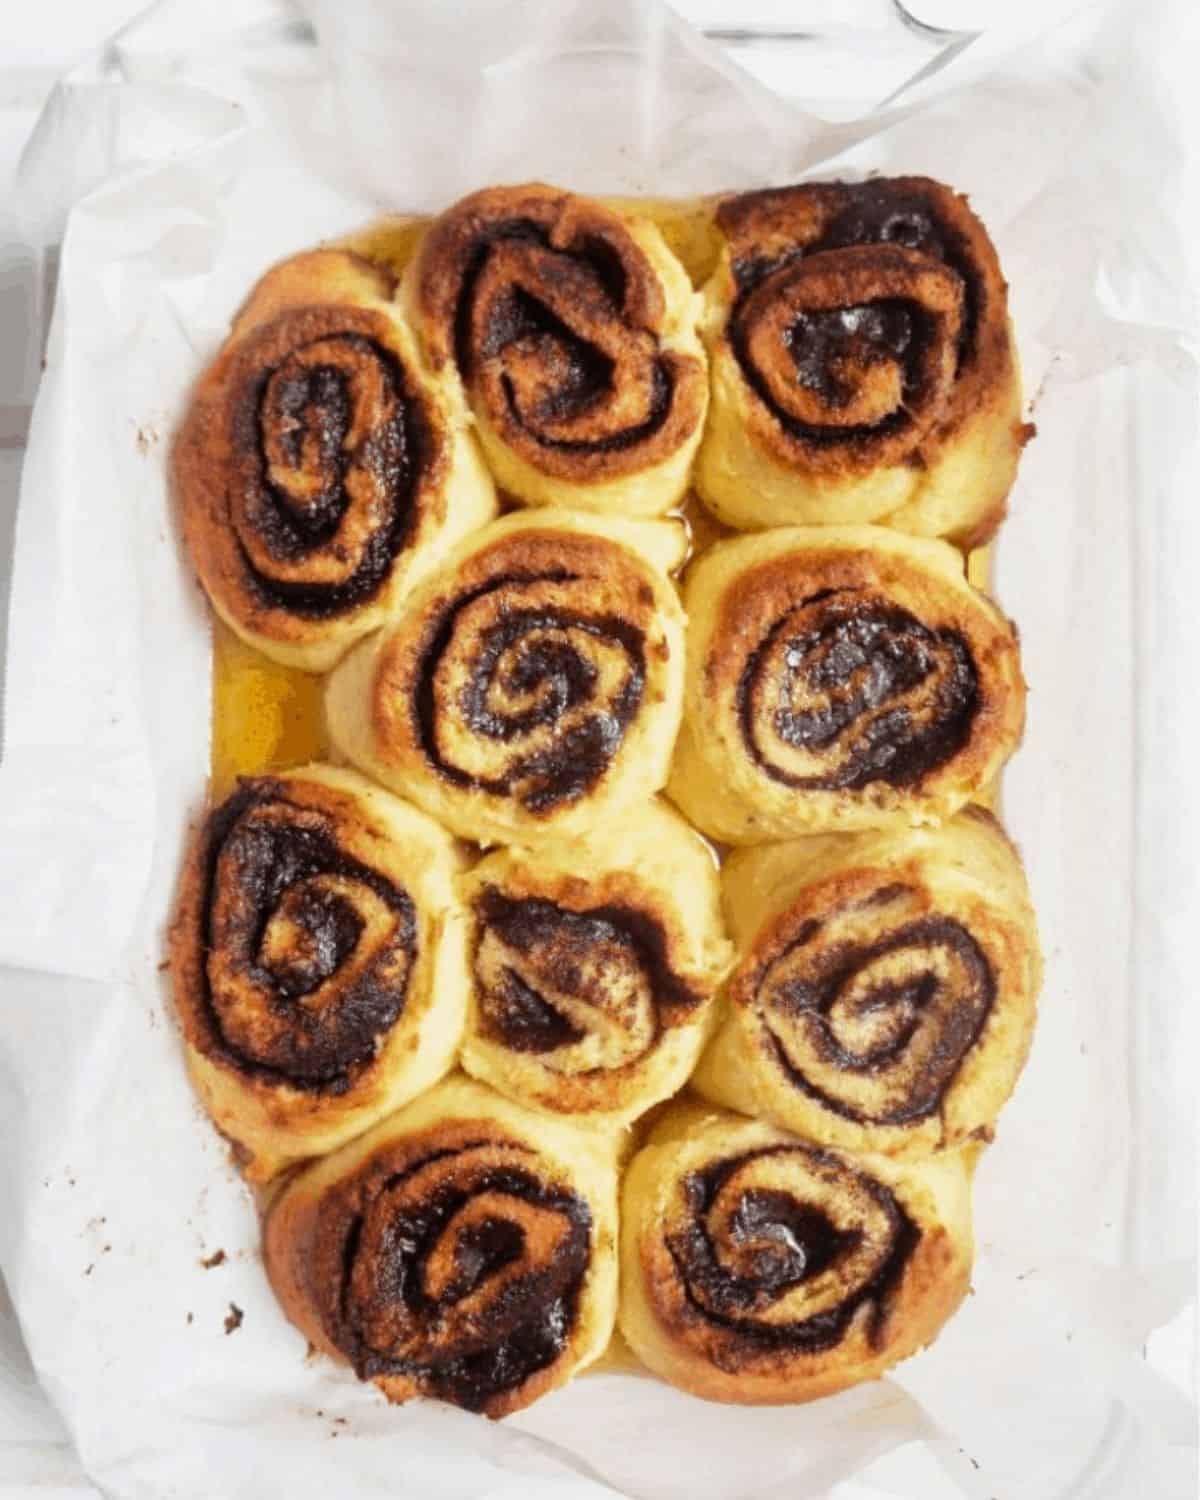 The baked cinnamon rolls in a baking dish right out of the oven